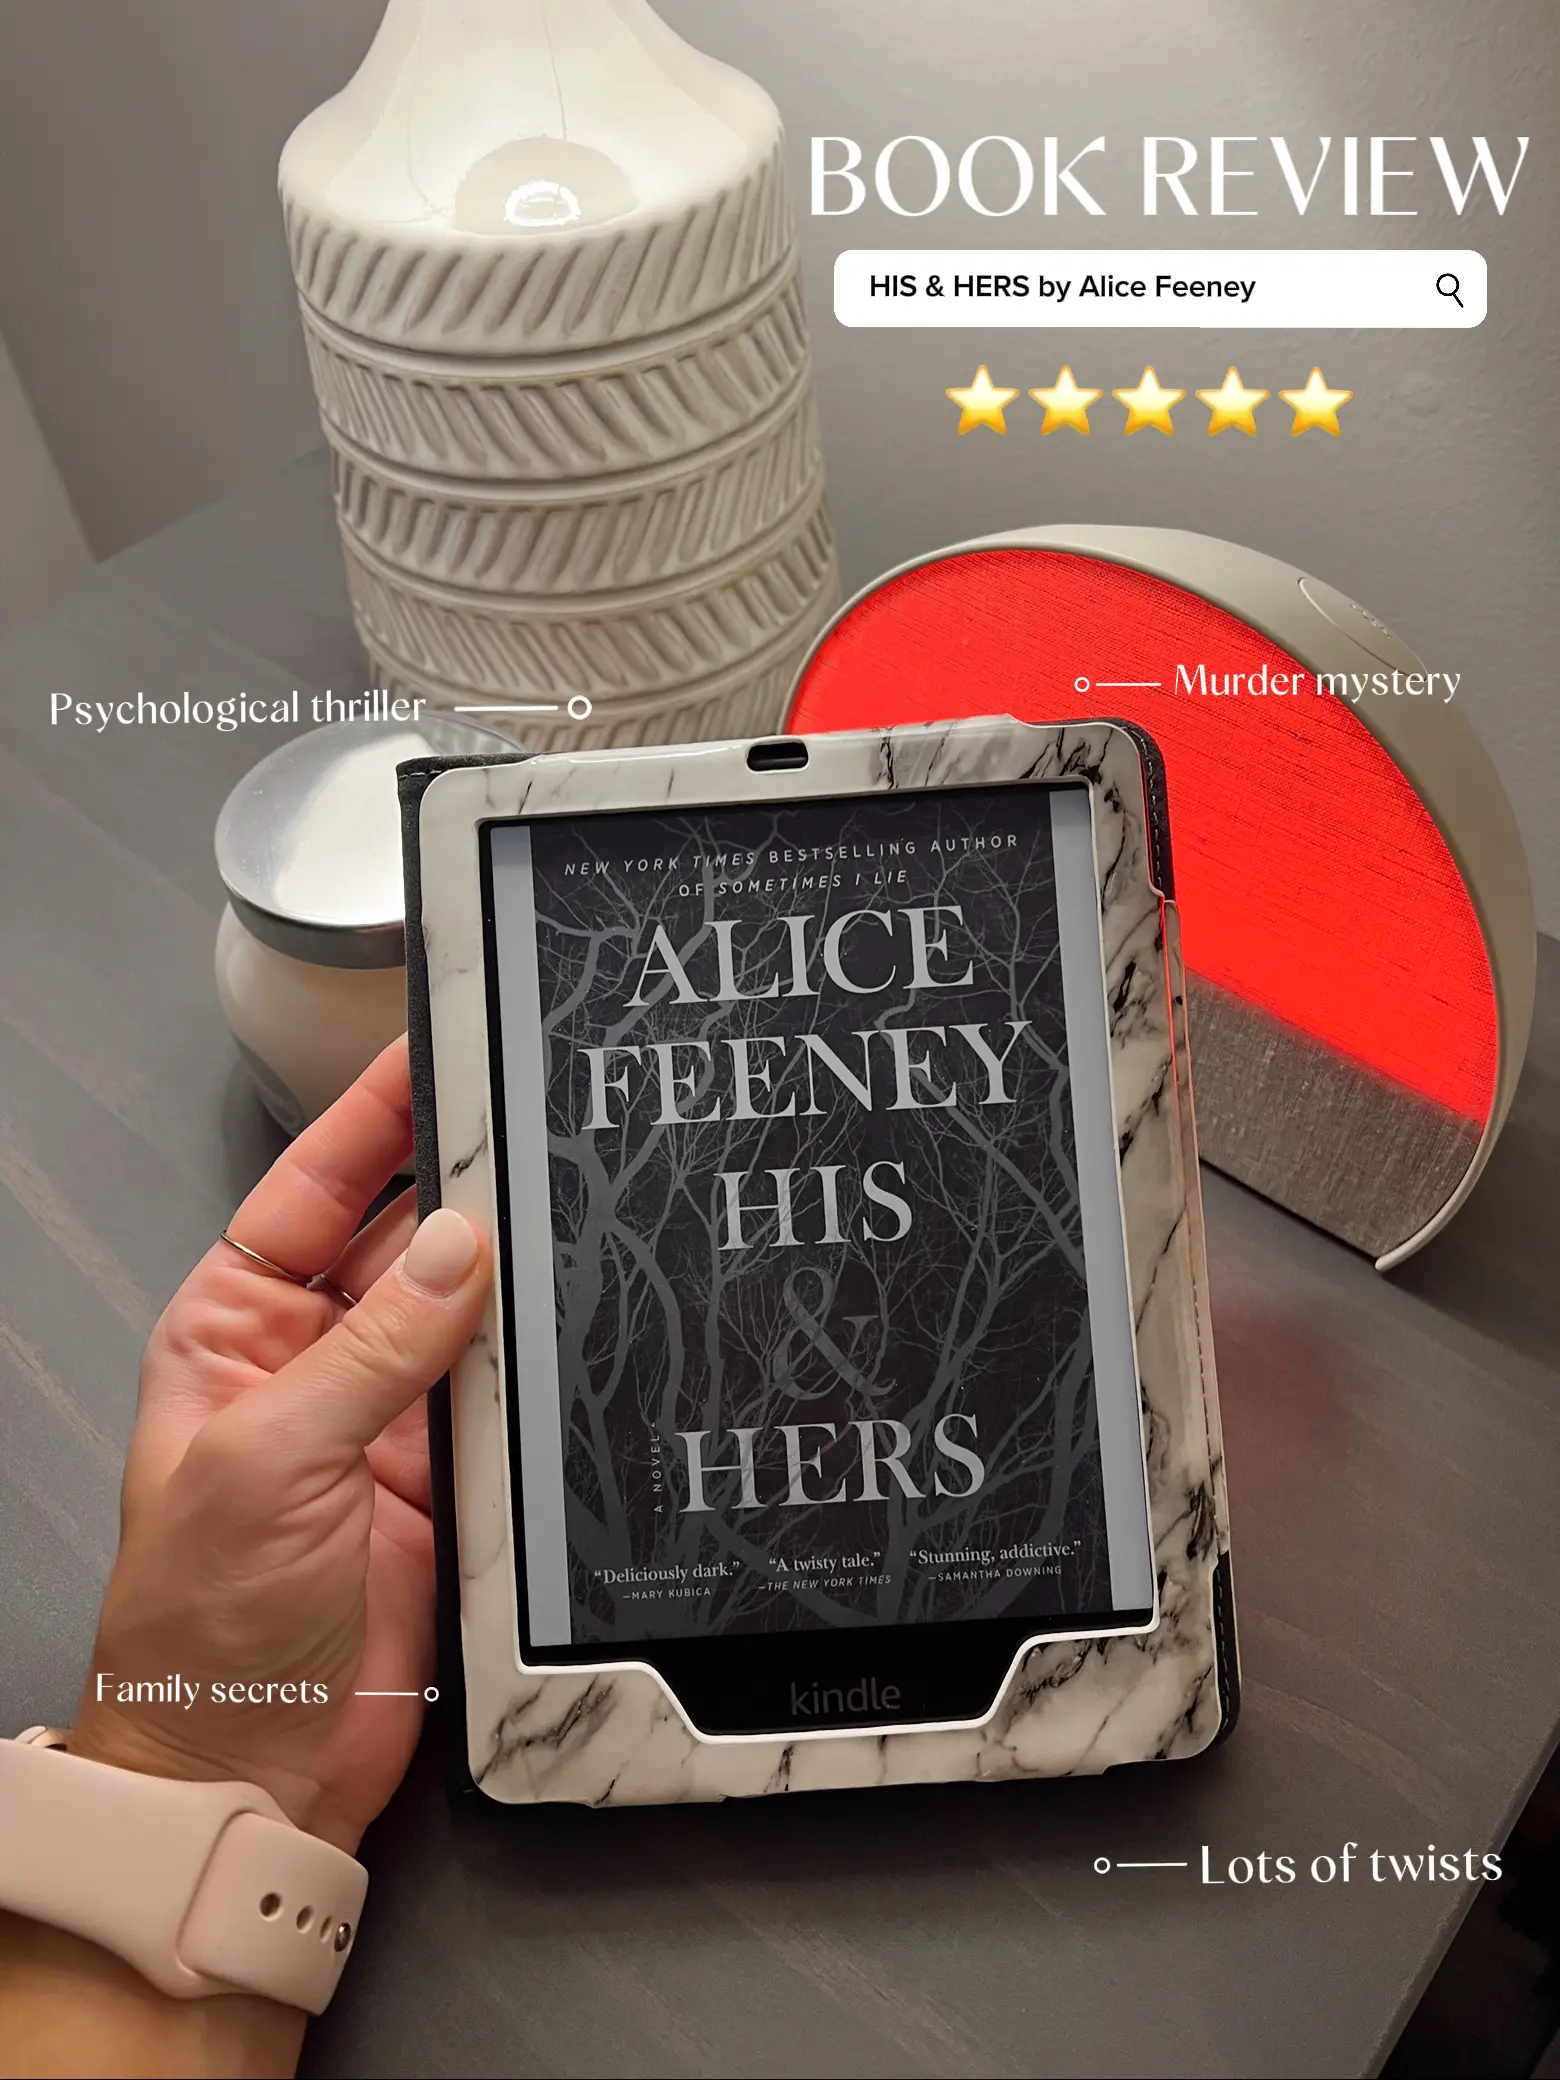 Book Review: His & Hers by Alice Feeney